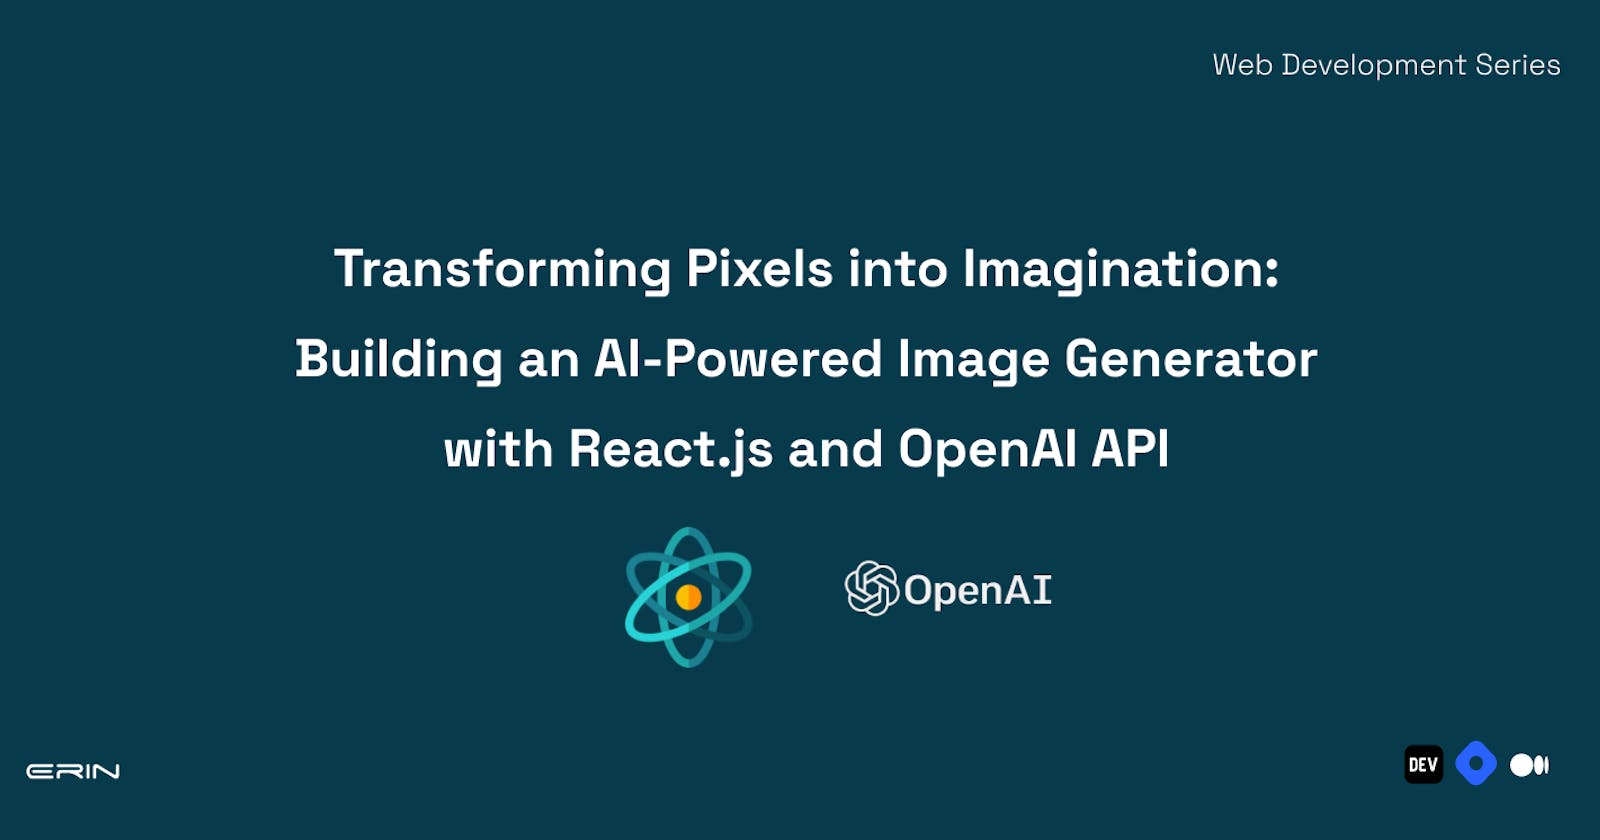 Transforming Pixels into Imagination: Building an AI-Powered Image Generator with React.js and OpenAI API